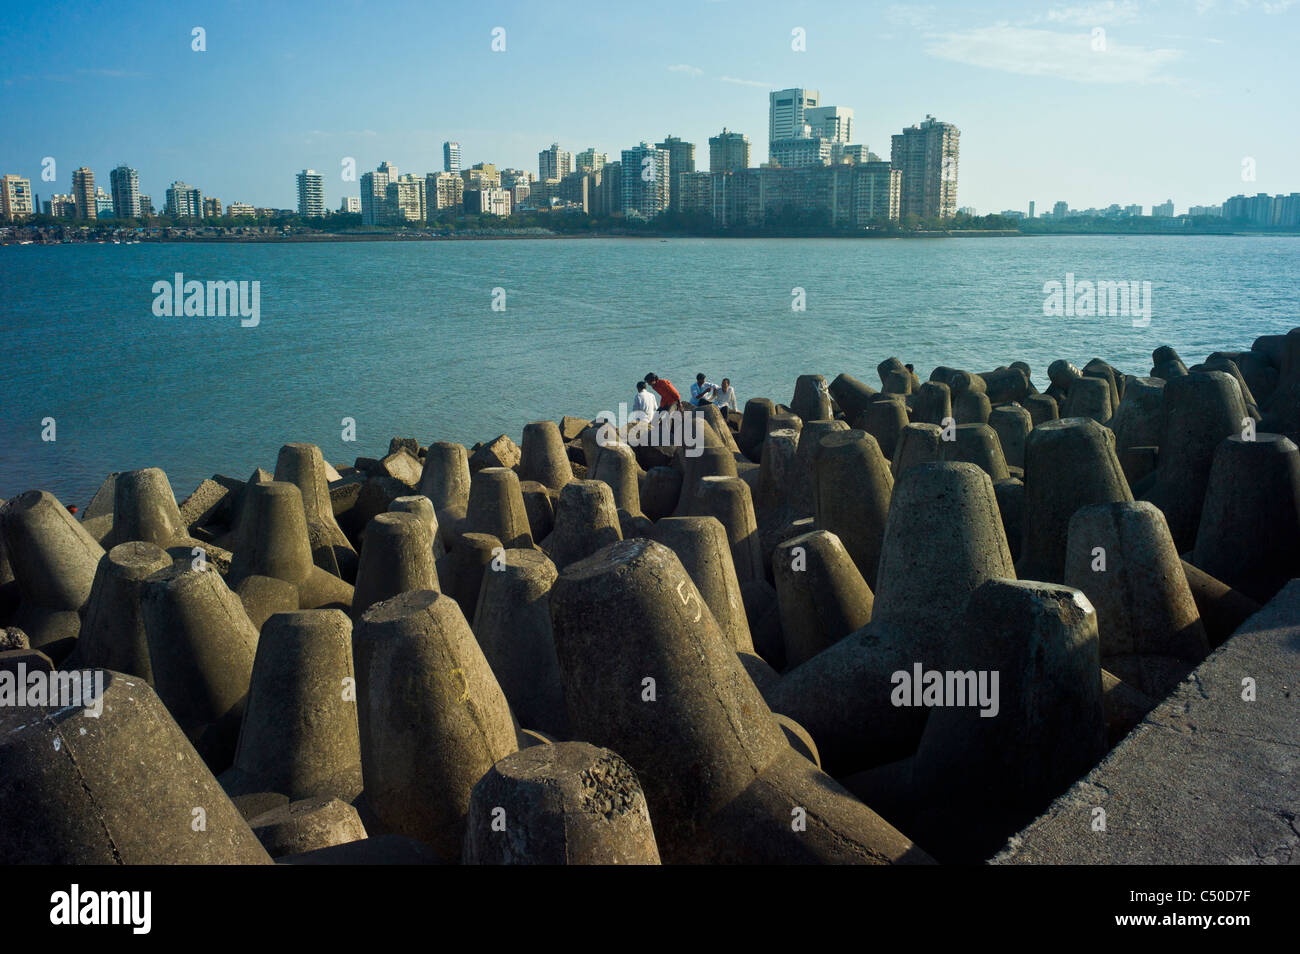 Concrete tetrapods protecting Marine Drive from the waves of the Arabic Ocean in South Mumbai, India. Stock Photo